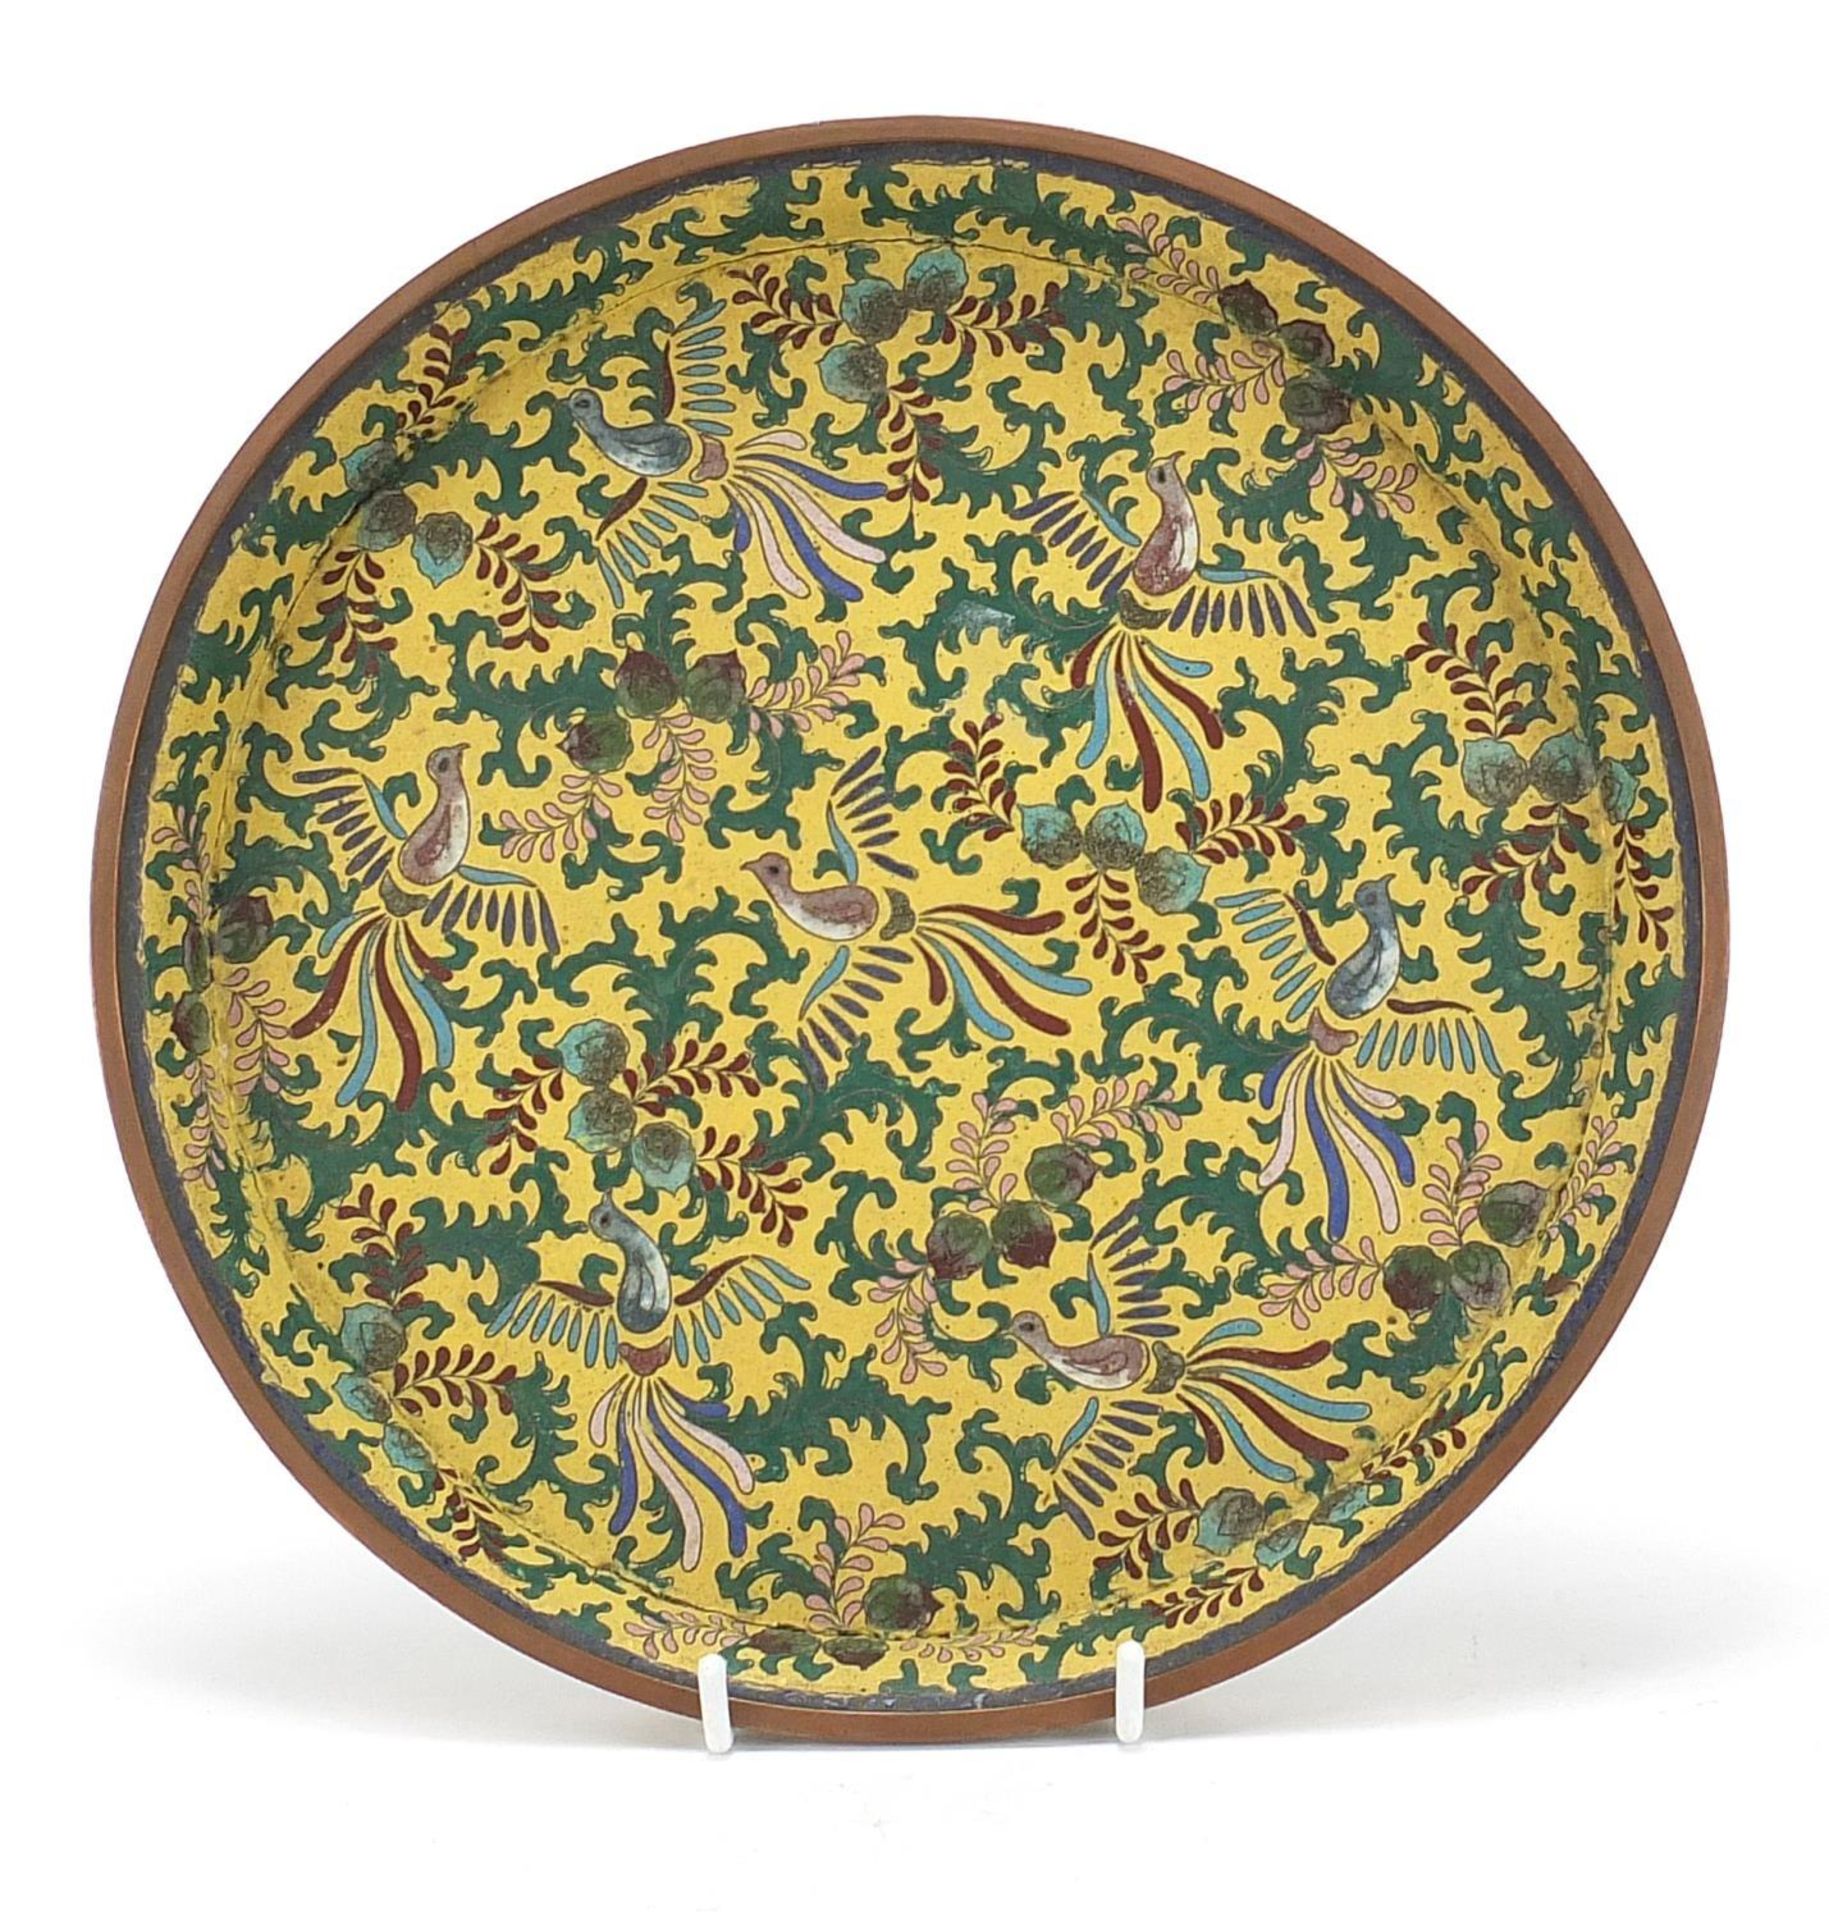 Chinese cloisonne serving tray enamelled with birds amongst foliage, character marks to the